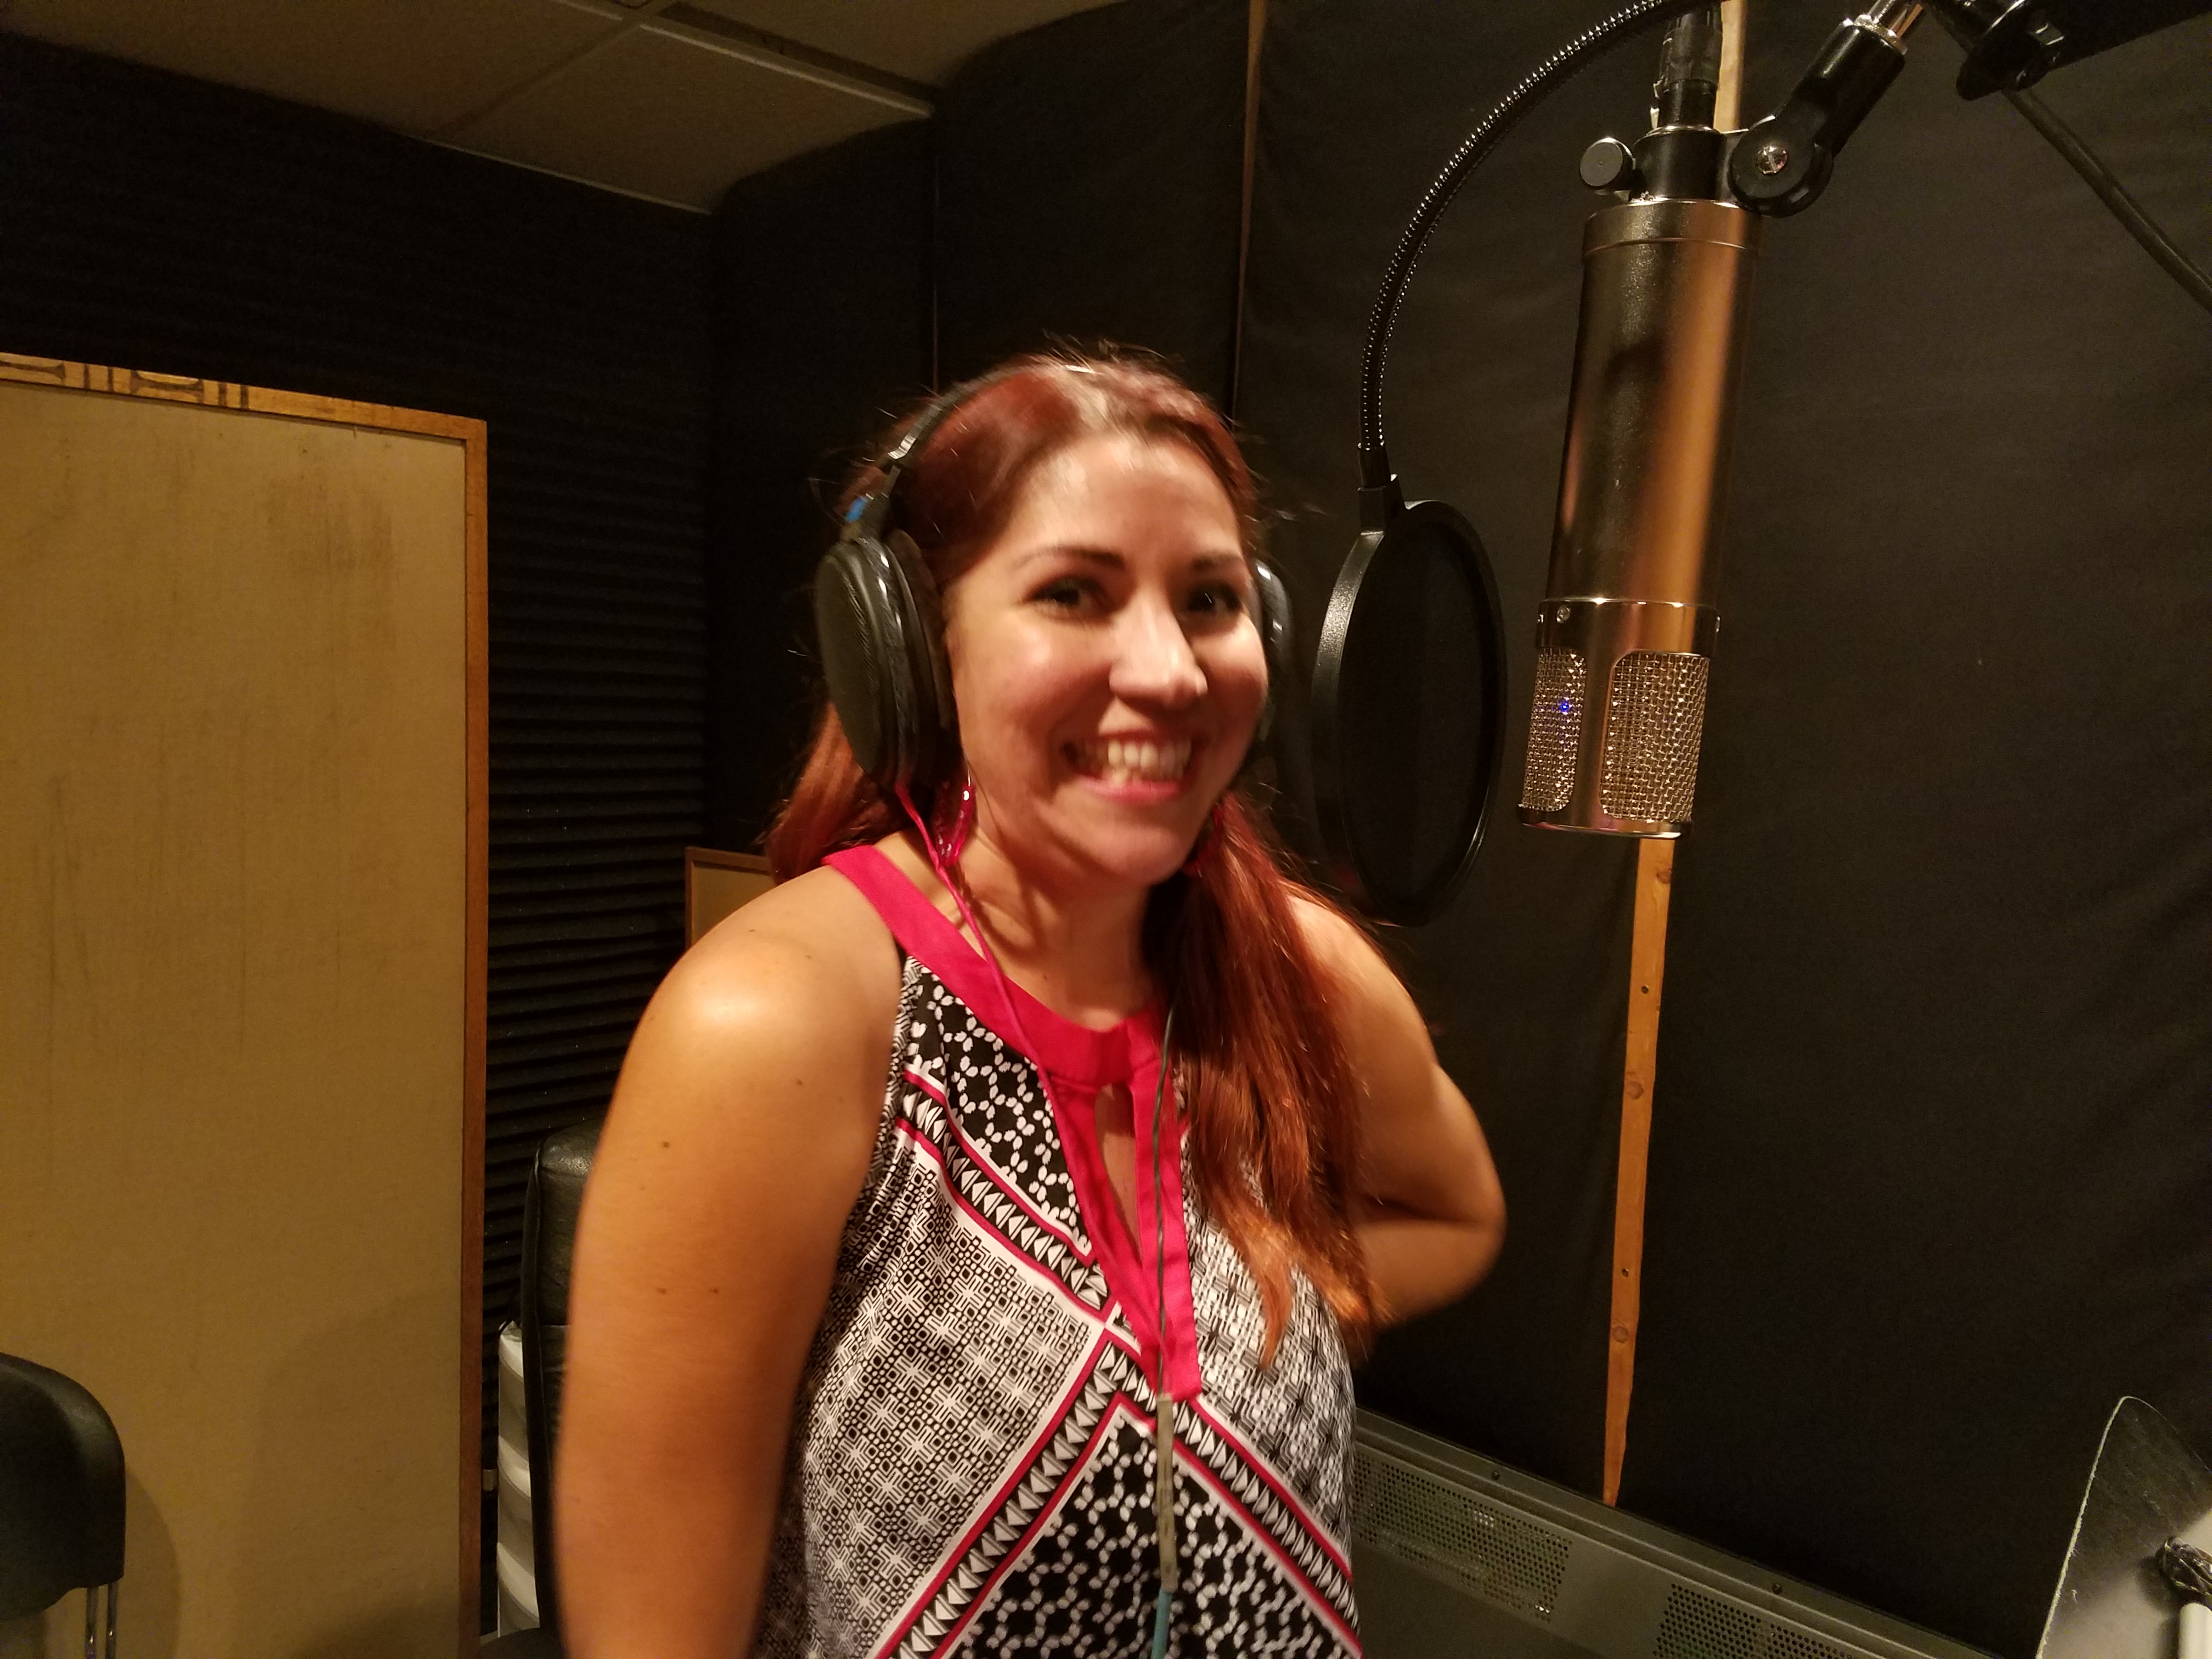 Another dream come true! Recording in another studio for another special project: my church, Second Baptist's VBS album! YAY!